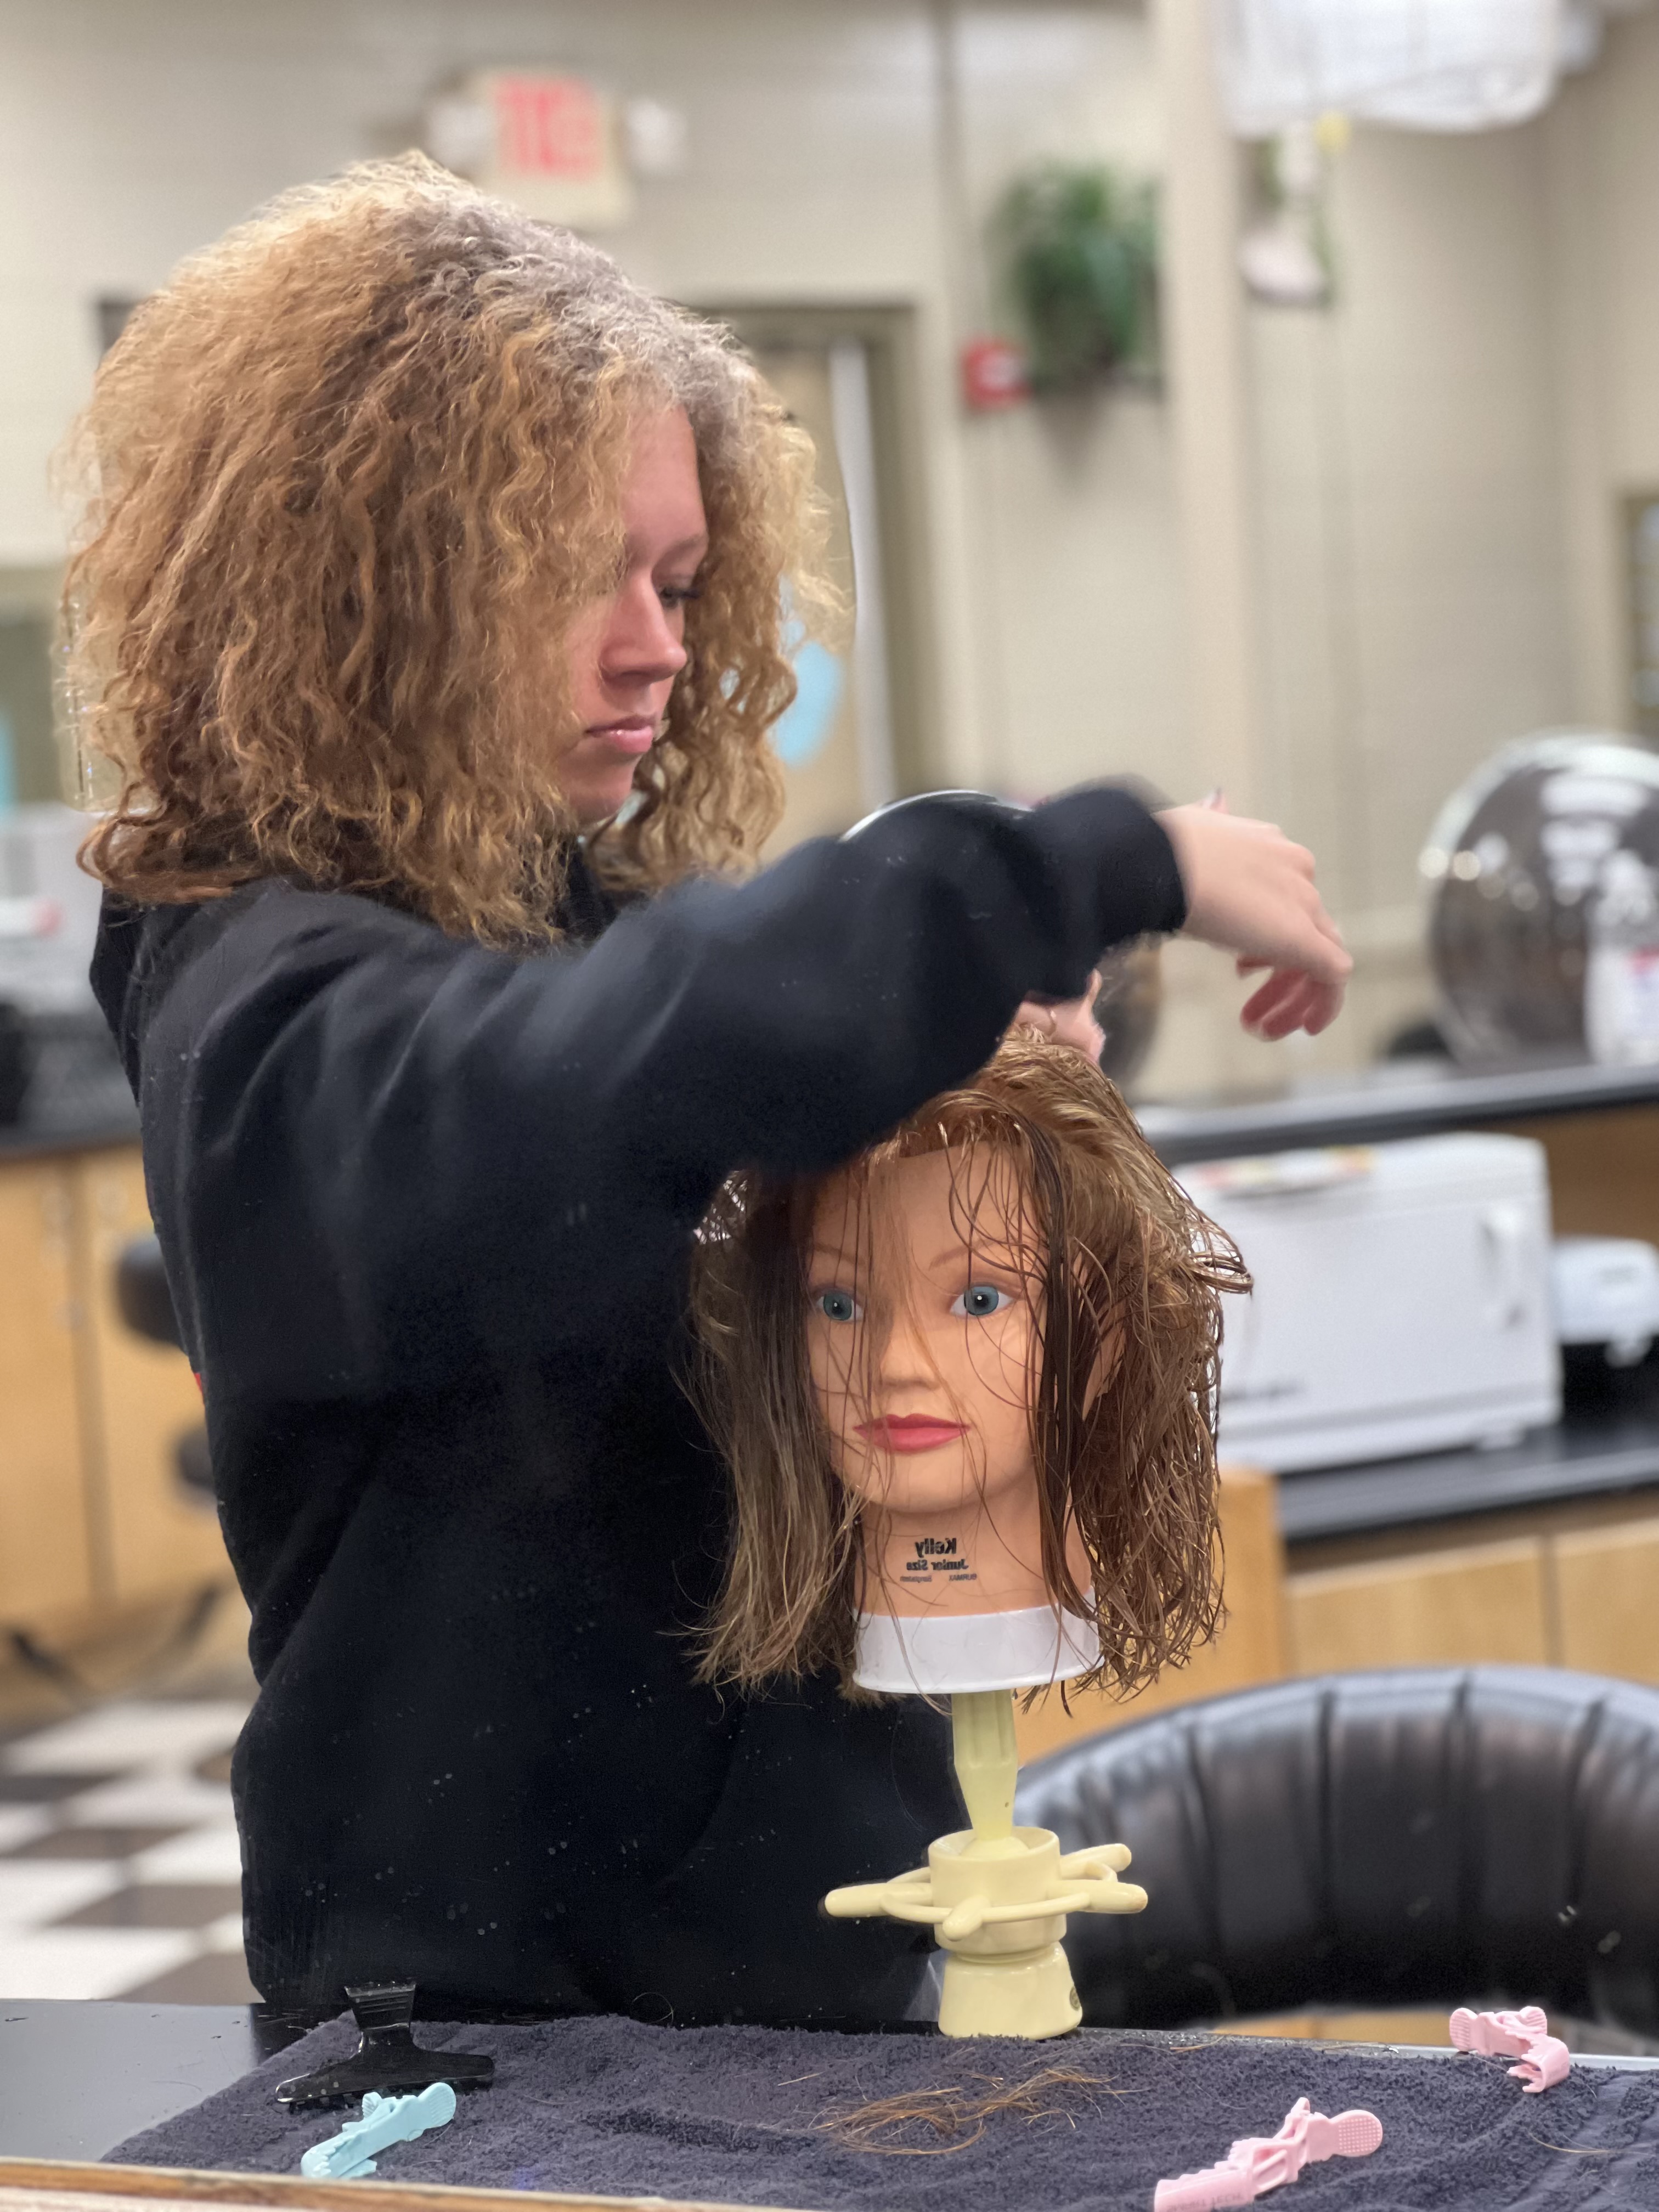 student cuts mannequin's hair